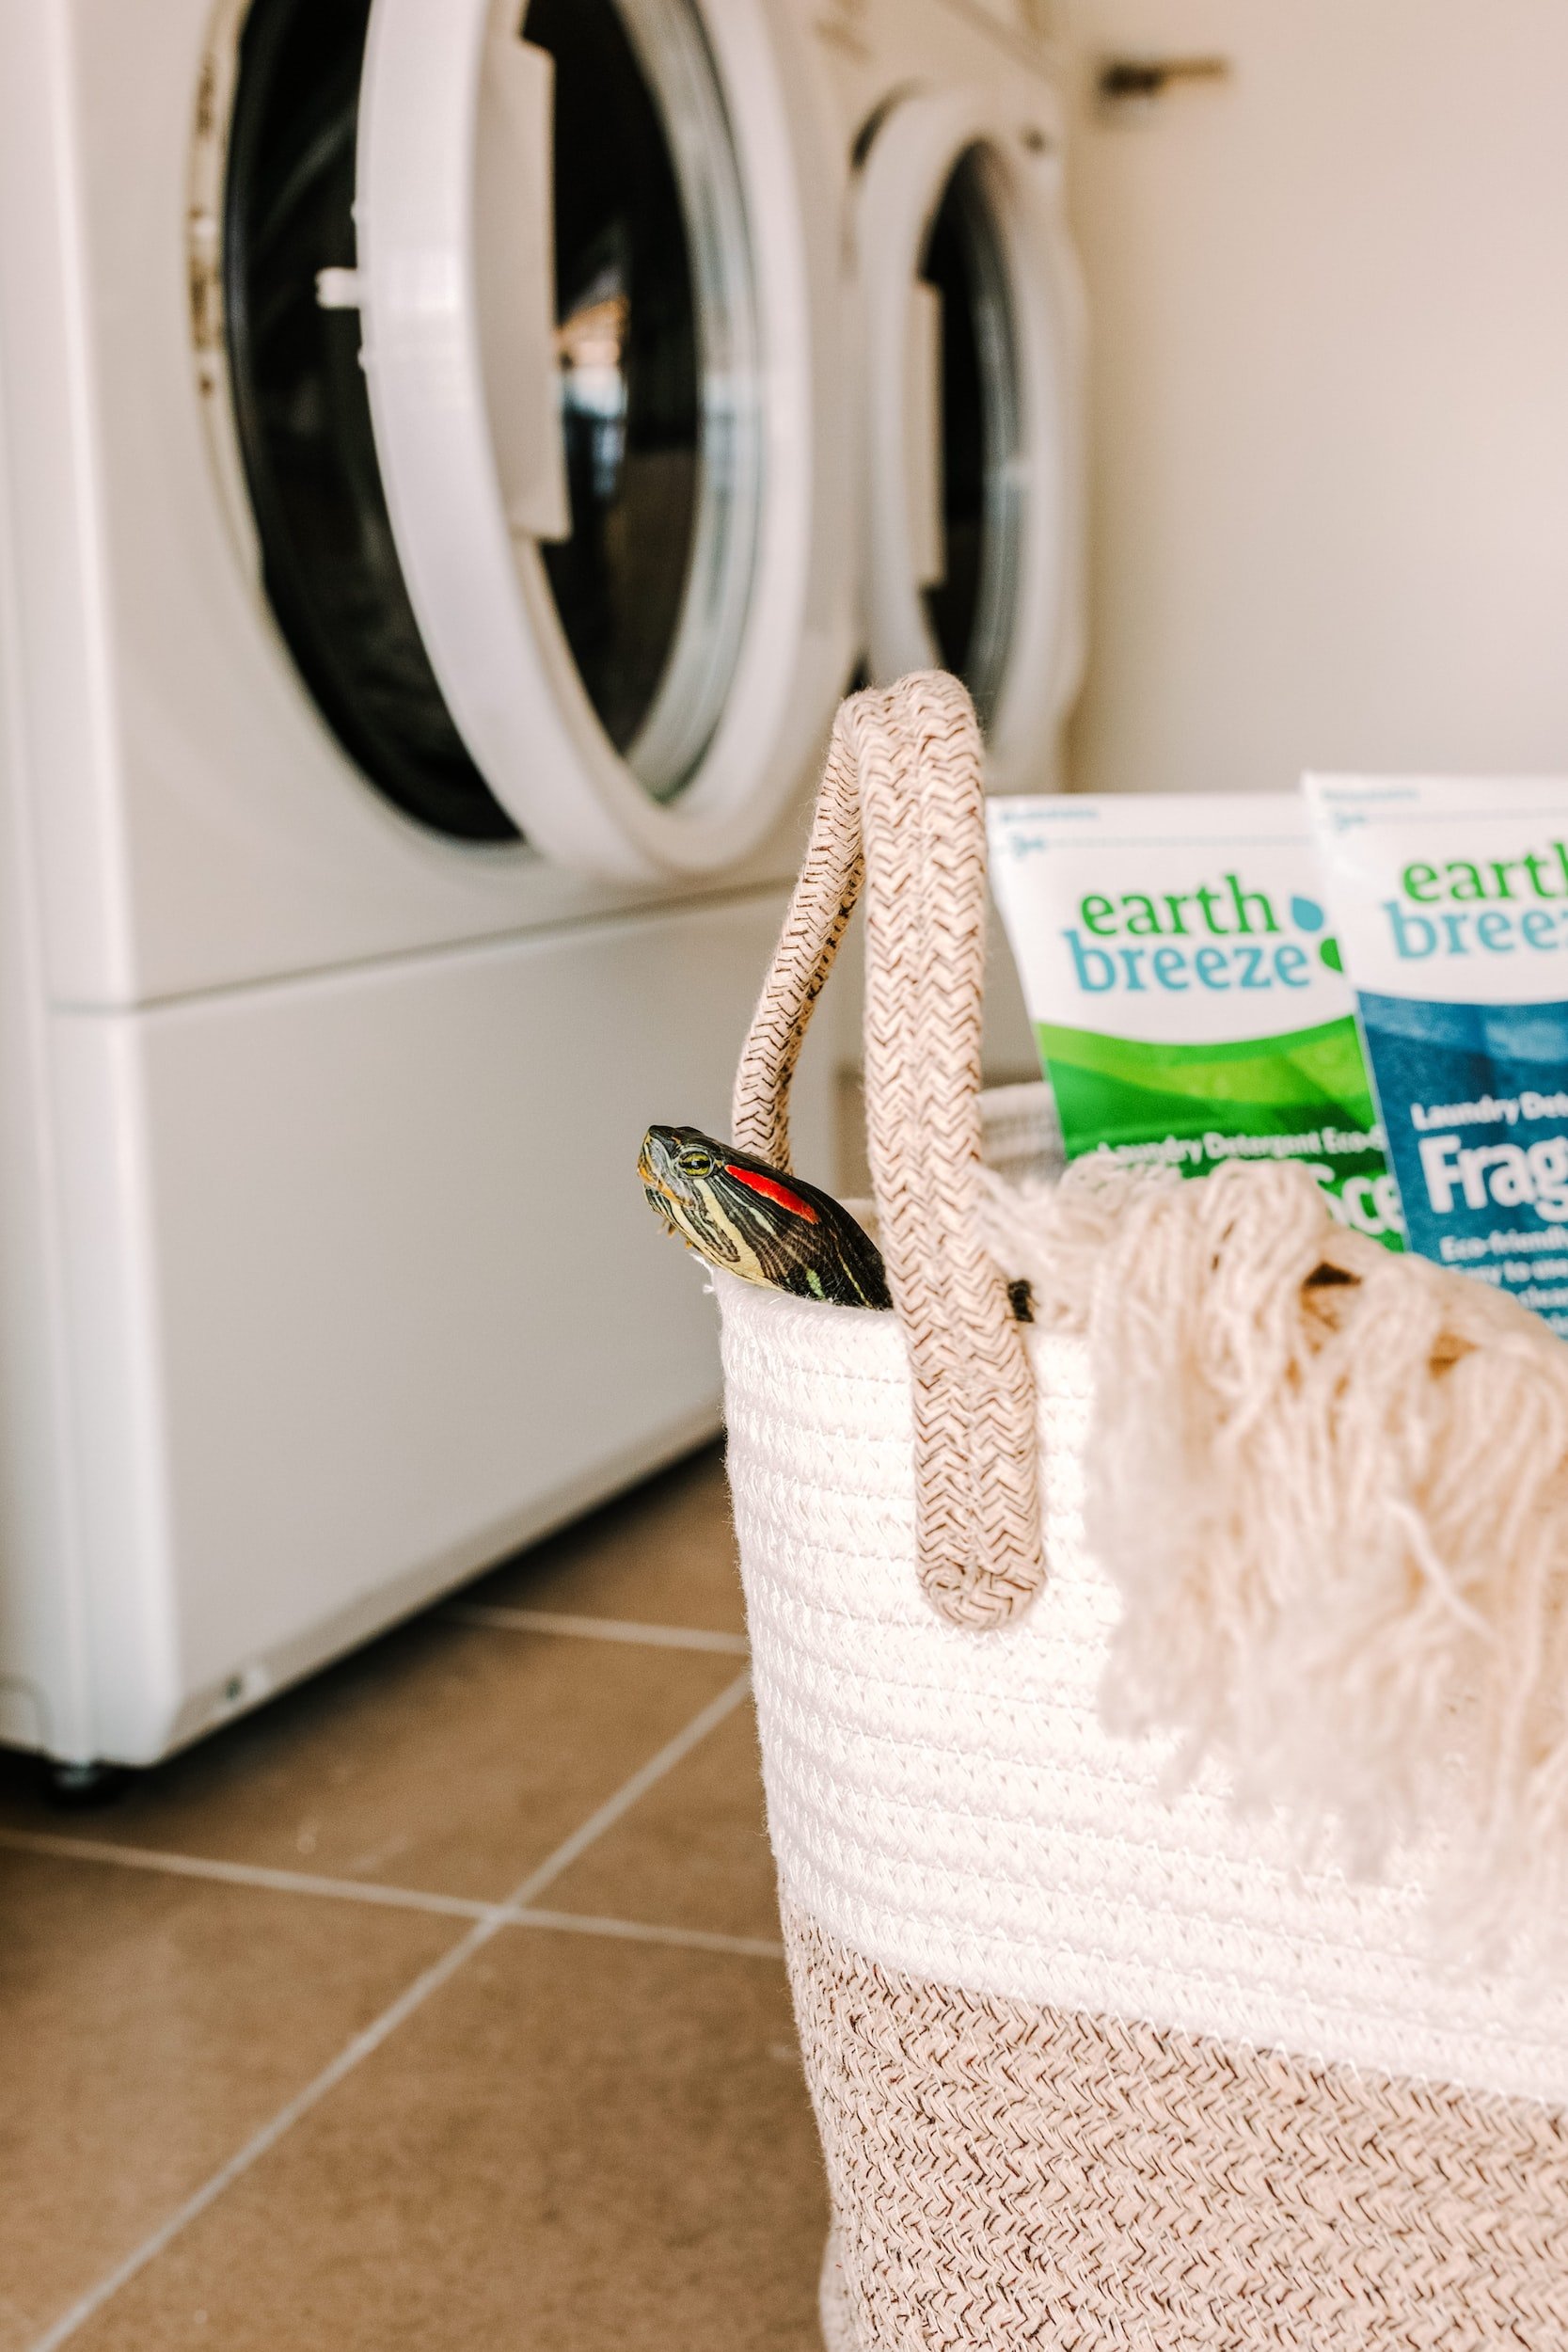 Top 10 Best Non-toxic Laundry Detergents for a Greener Home